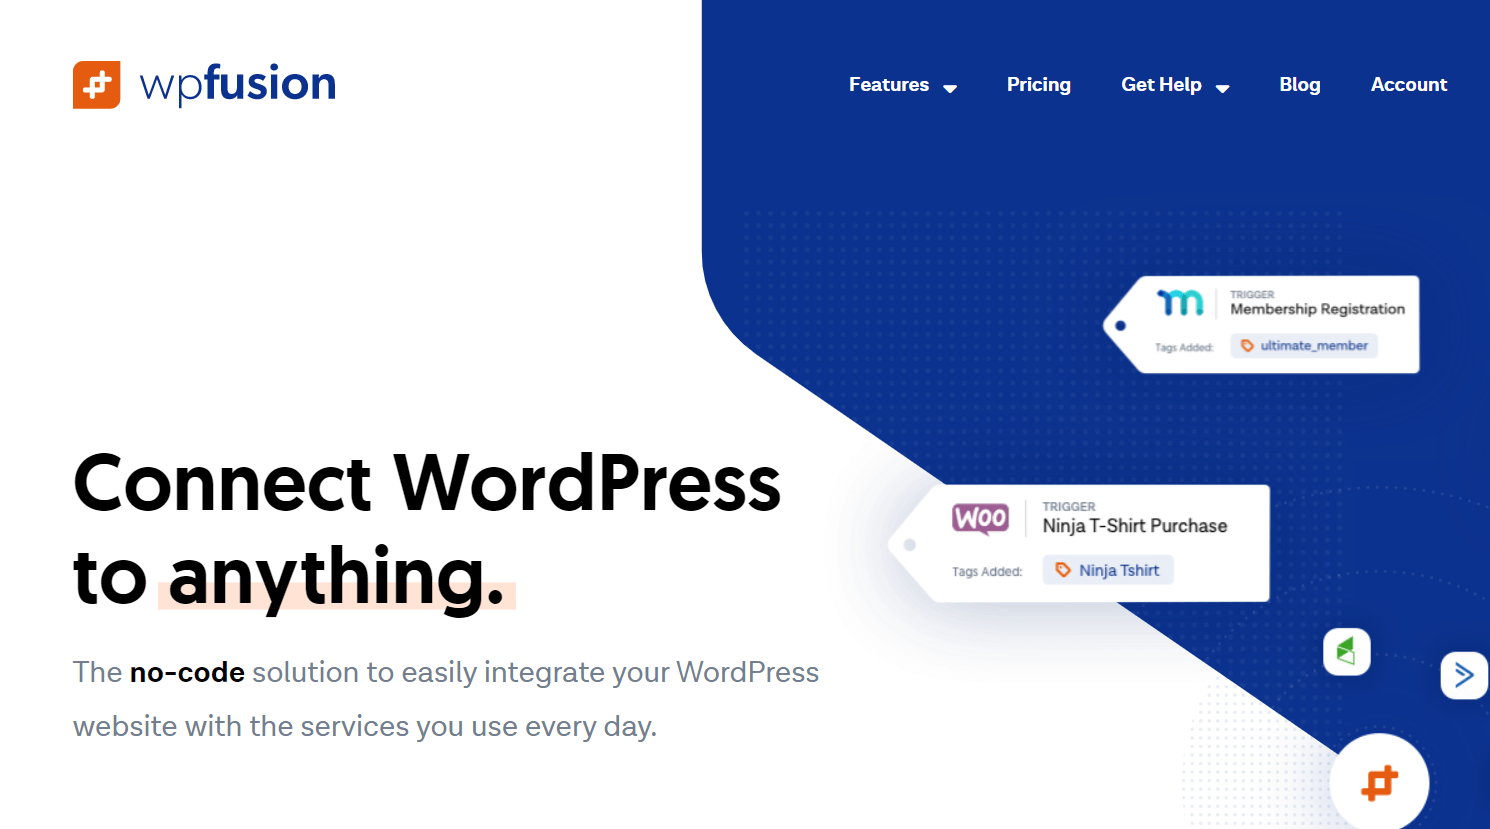 Wpfusion website home page, one of the best CRM plugins for WordPress